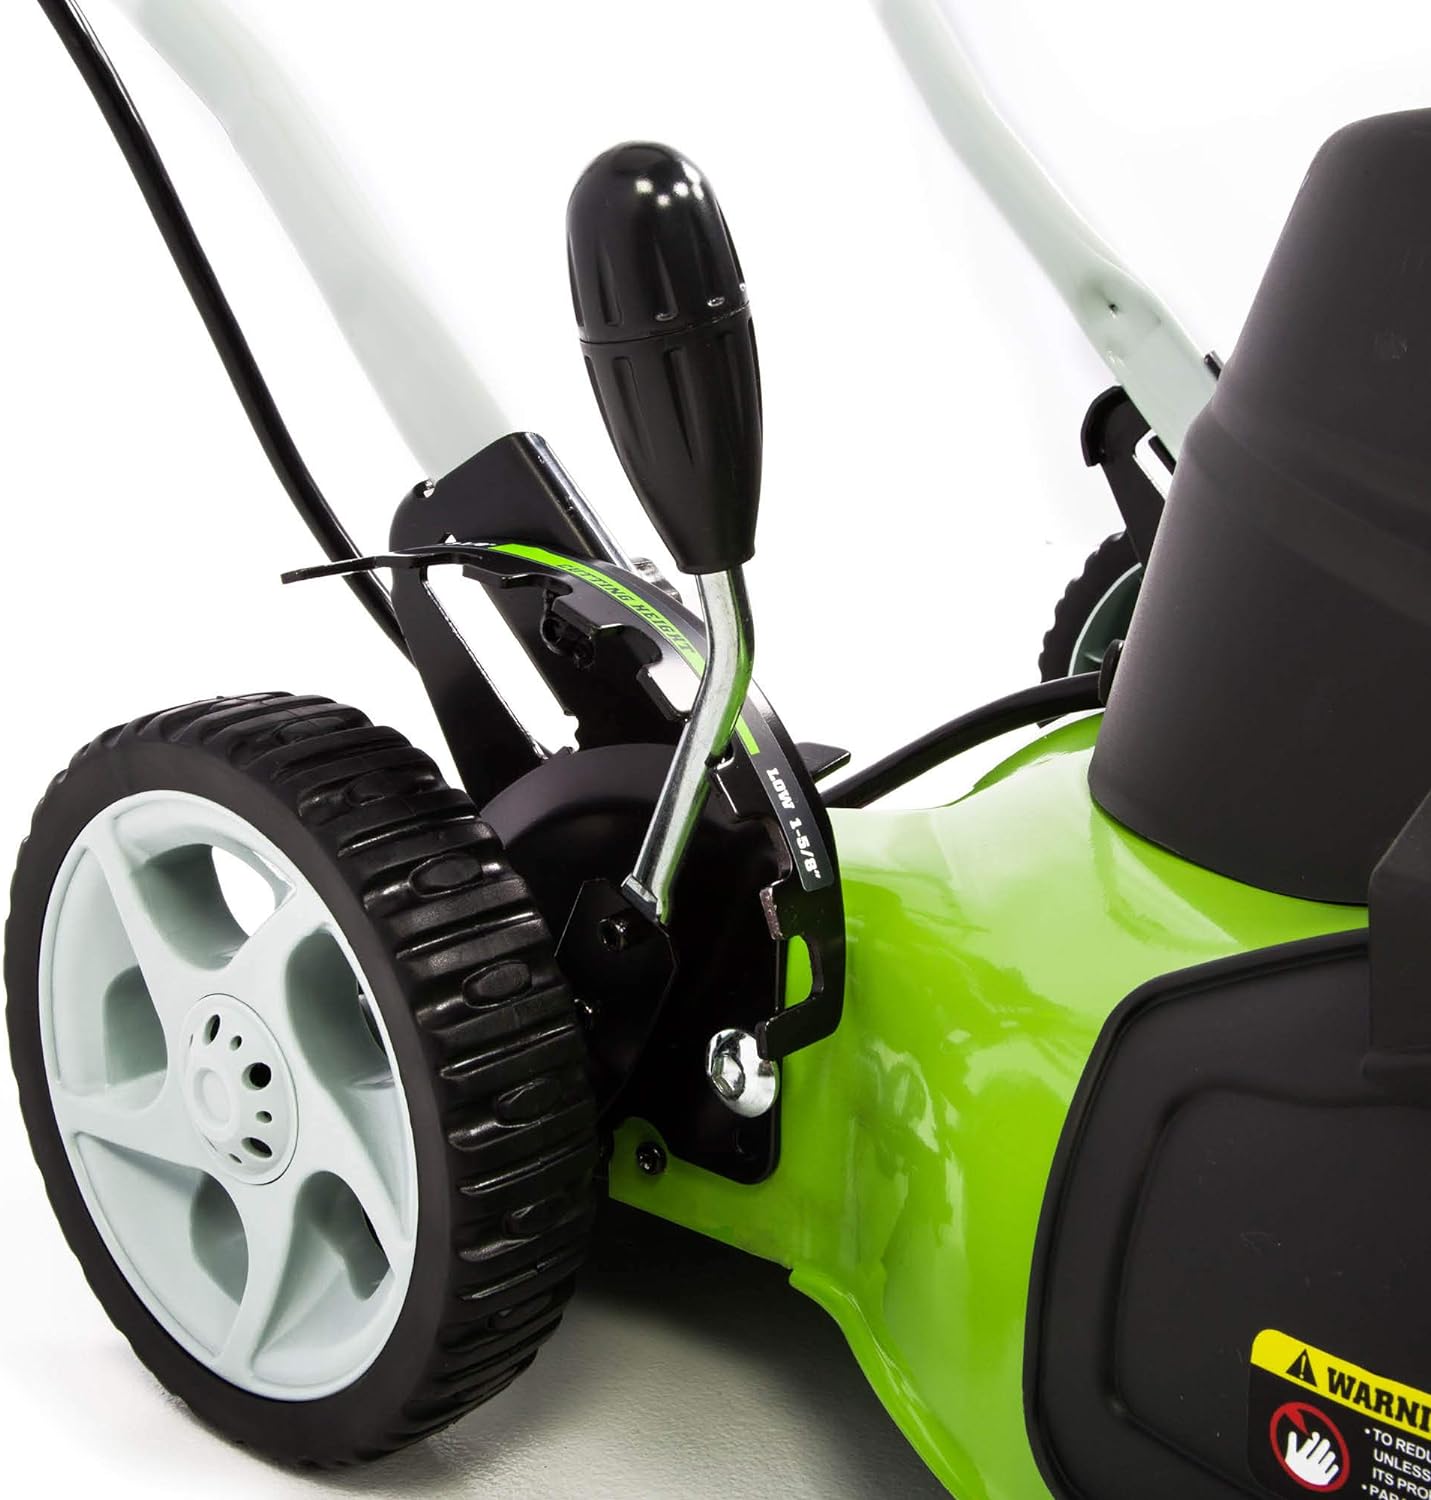 Greenworks 18" Corded Electric 12 Amp Push Lawn Mower 25012 - image 4 of 6